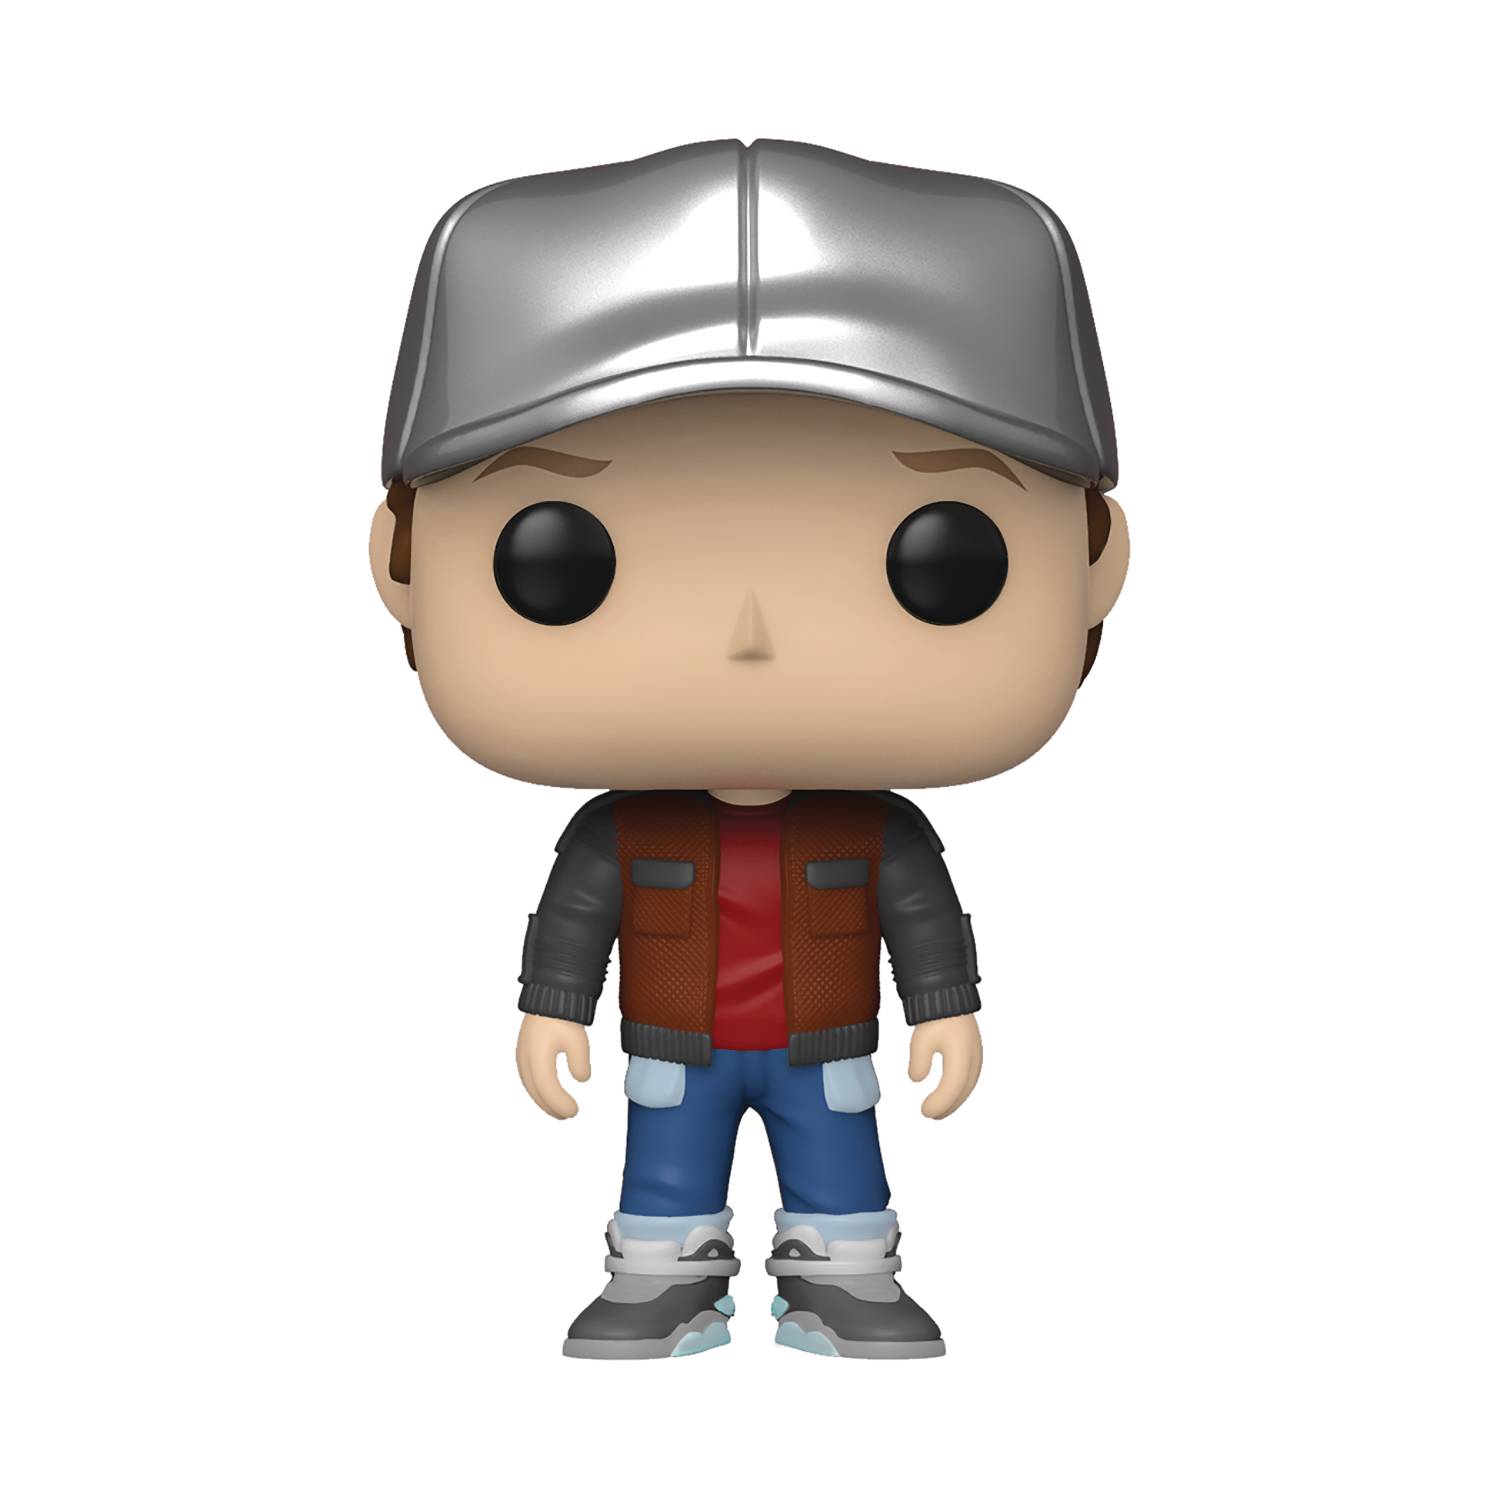 POP MOVIE BTTF MARTY IN FUTURE OUTFIT VINYL FIGURE